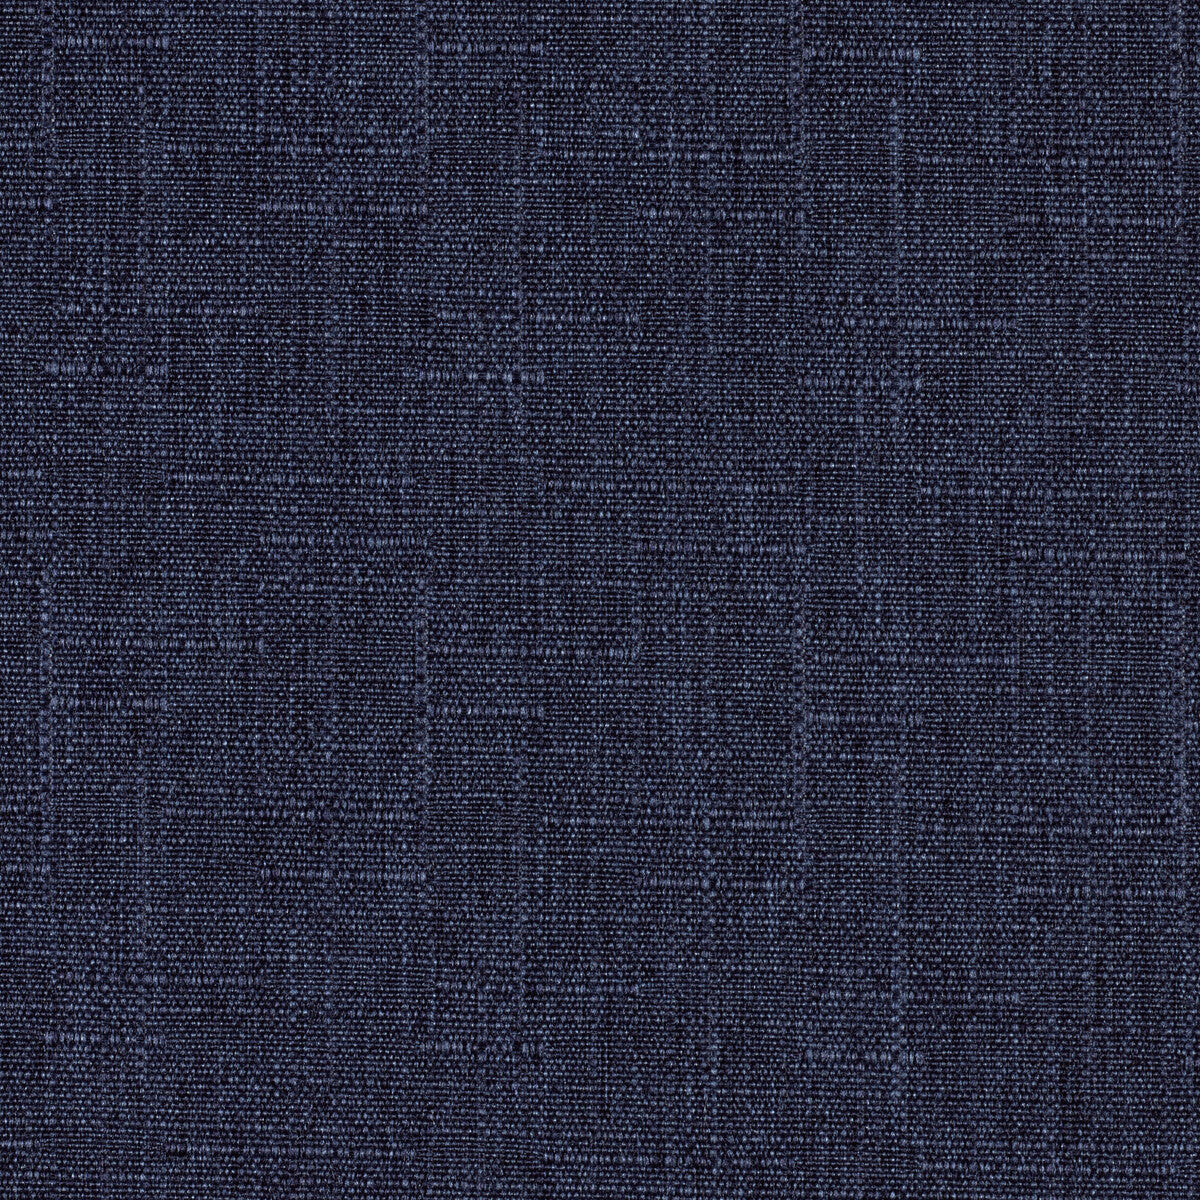 Kravet Contract fabric in 4317-50 color - pattern 4317.50.0 - by Kravet Contract